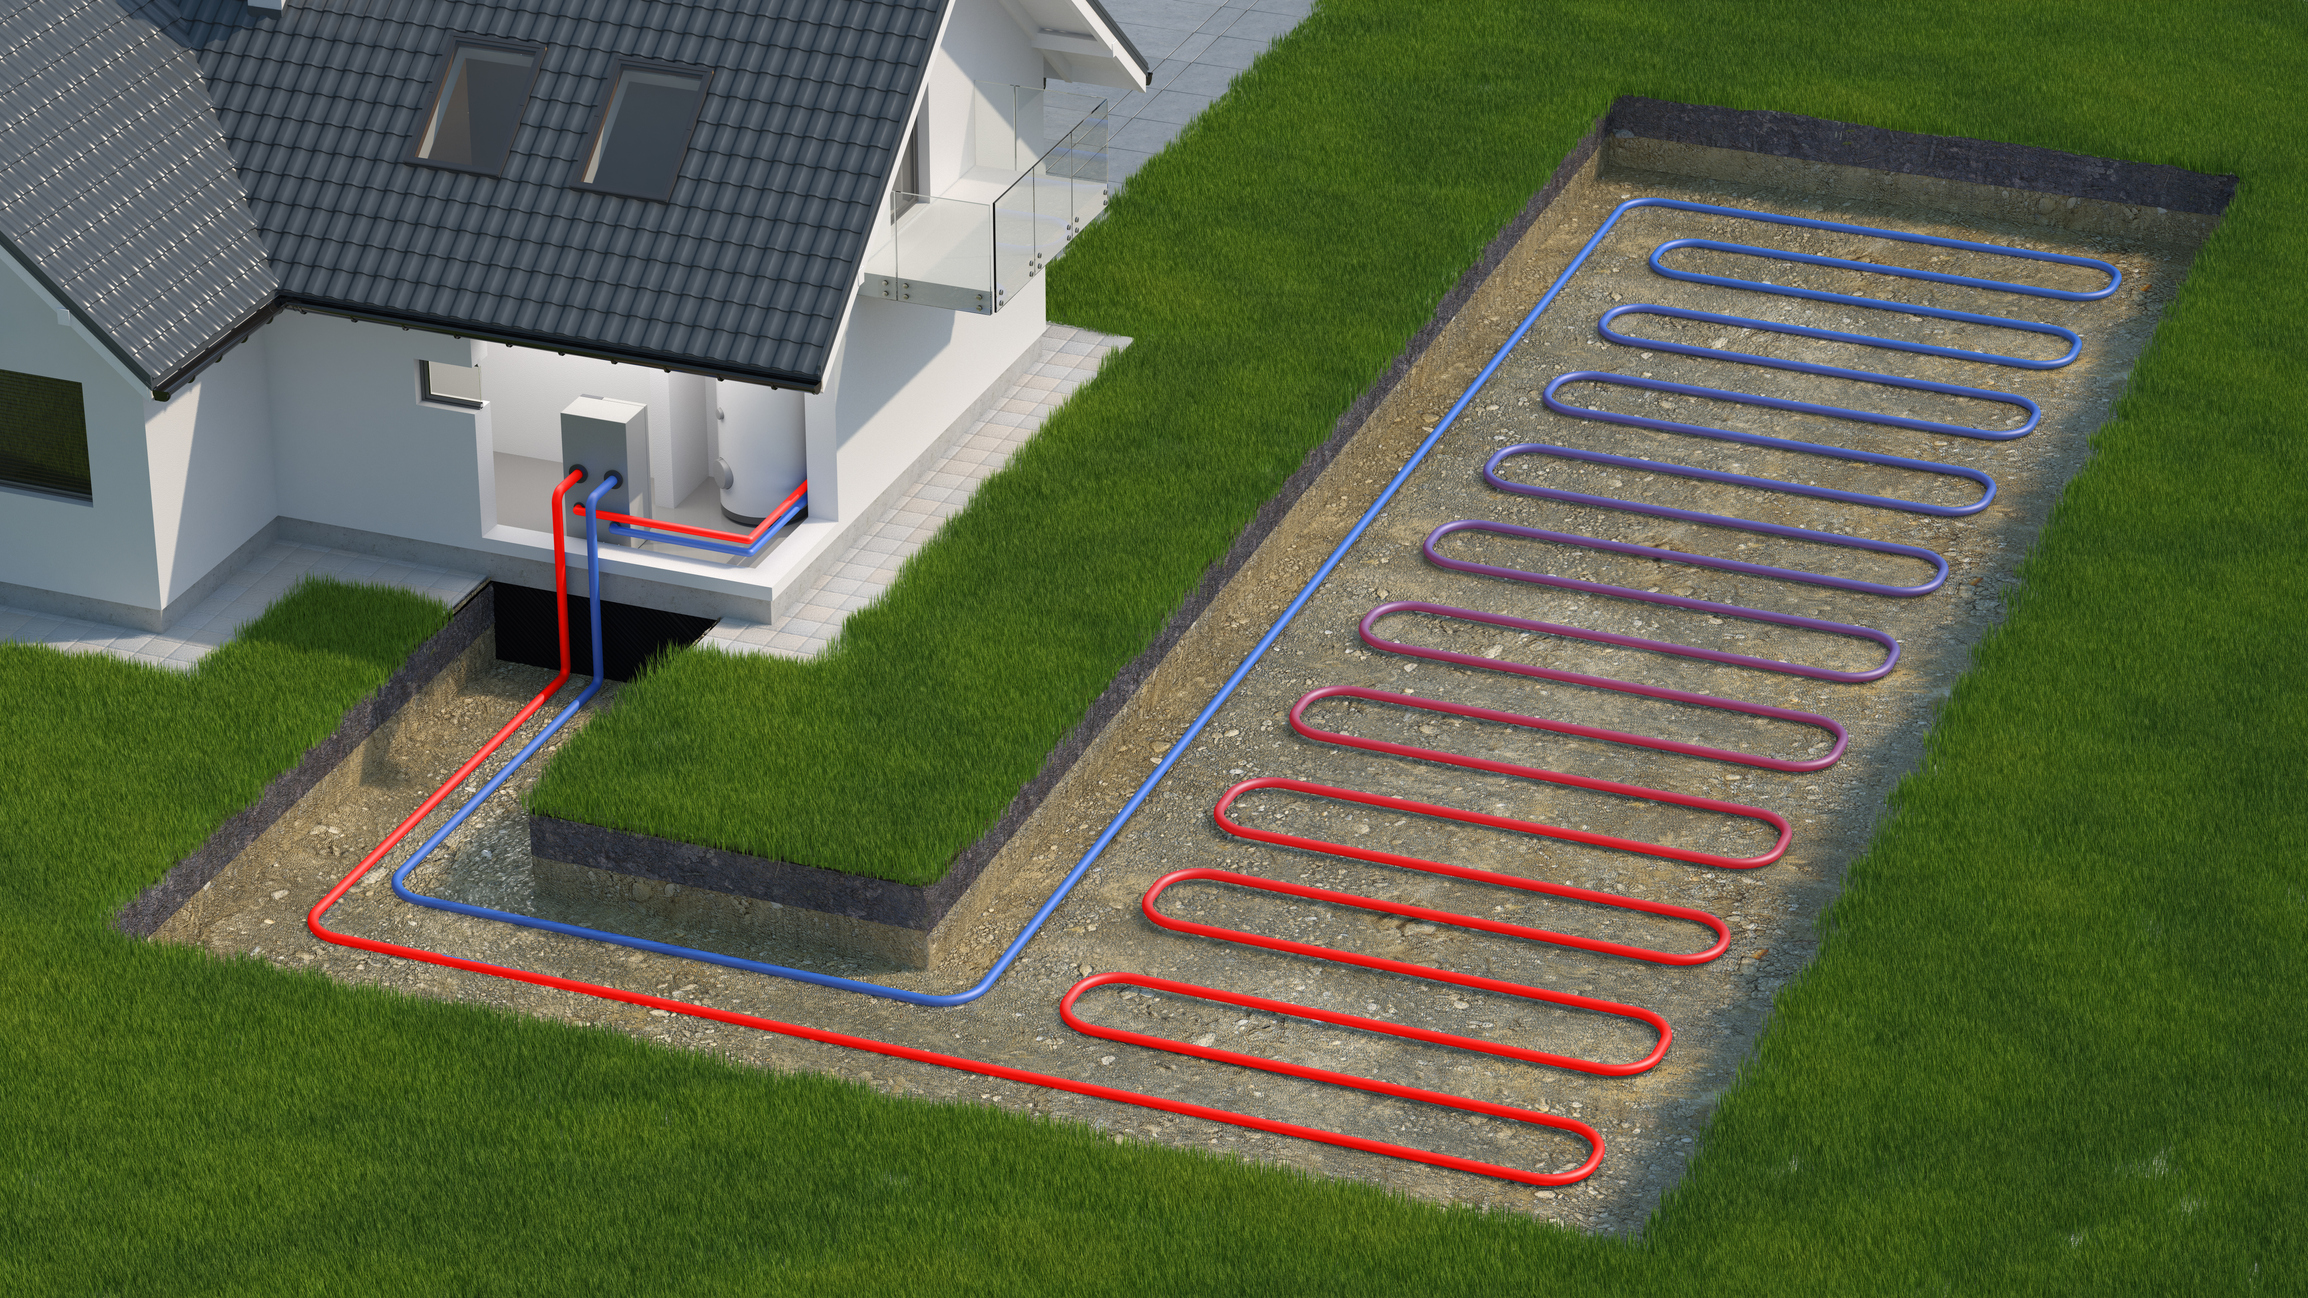 Graphic of geothermal heating system with house and yard